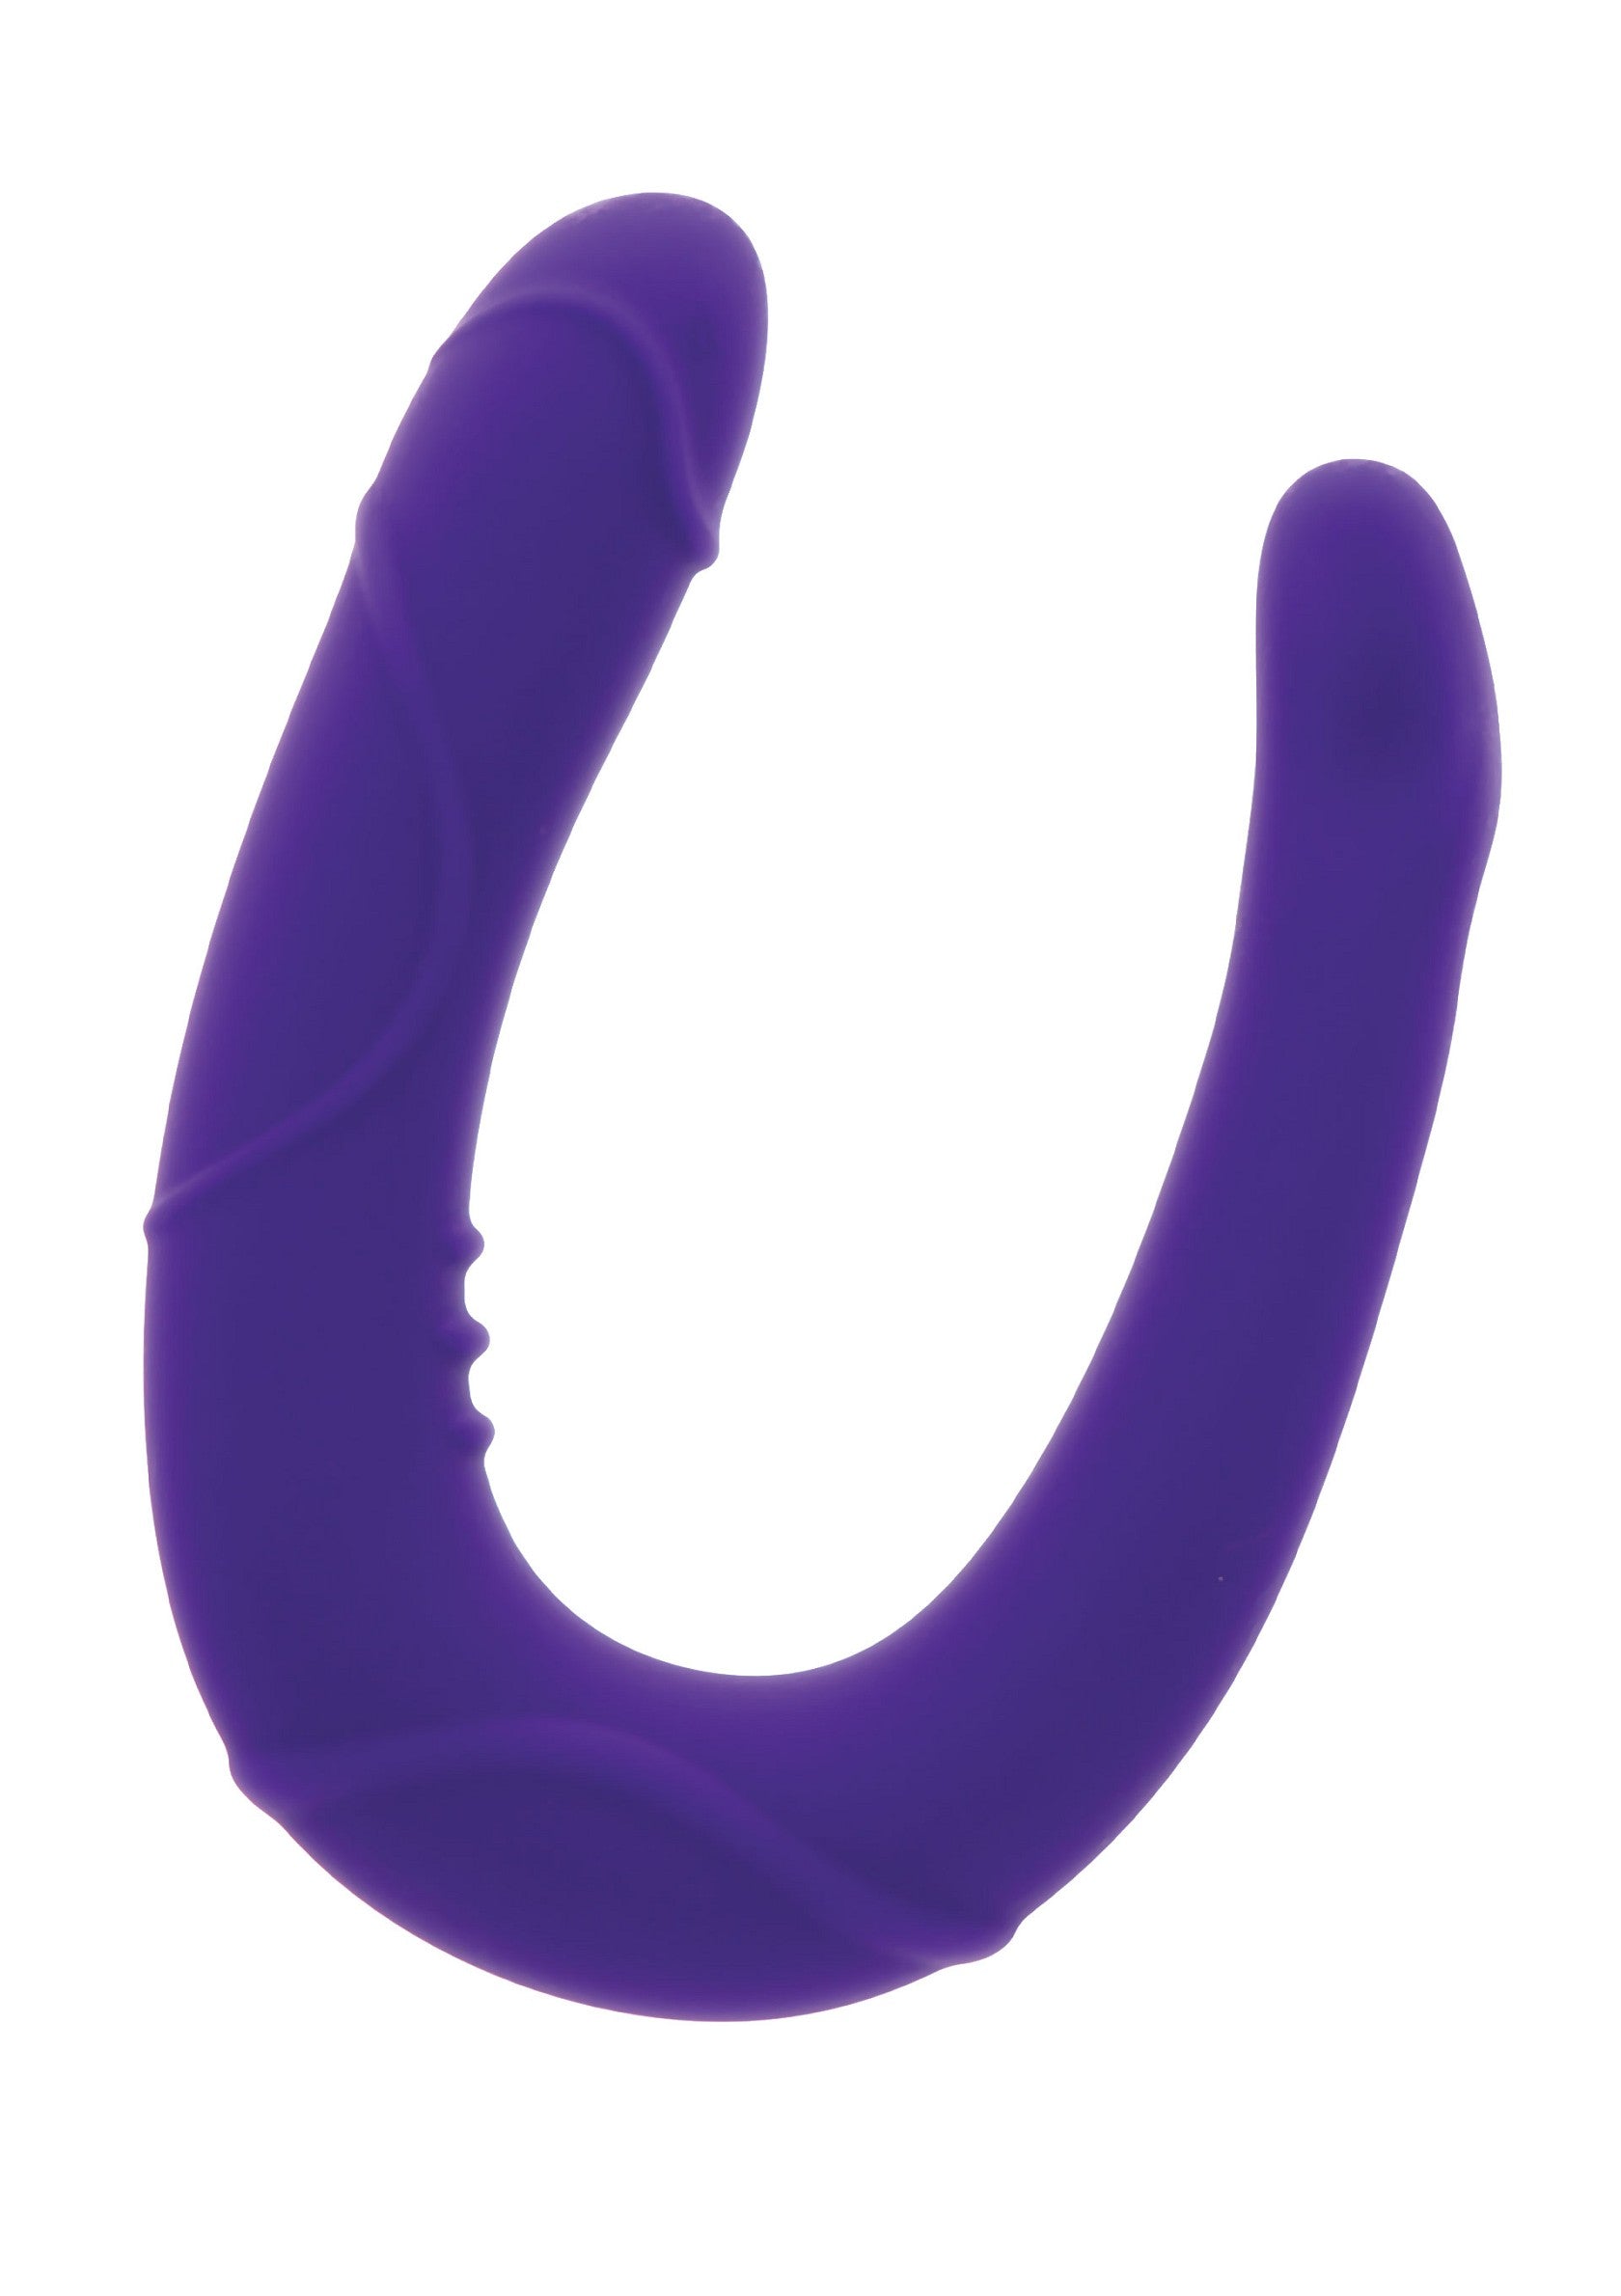 ToyJoy Get Real Vogue Mini Double Dong PURPLE - 2